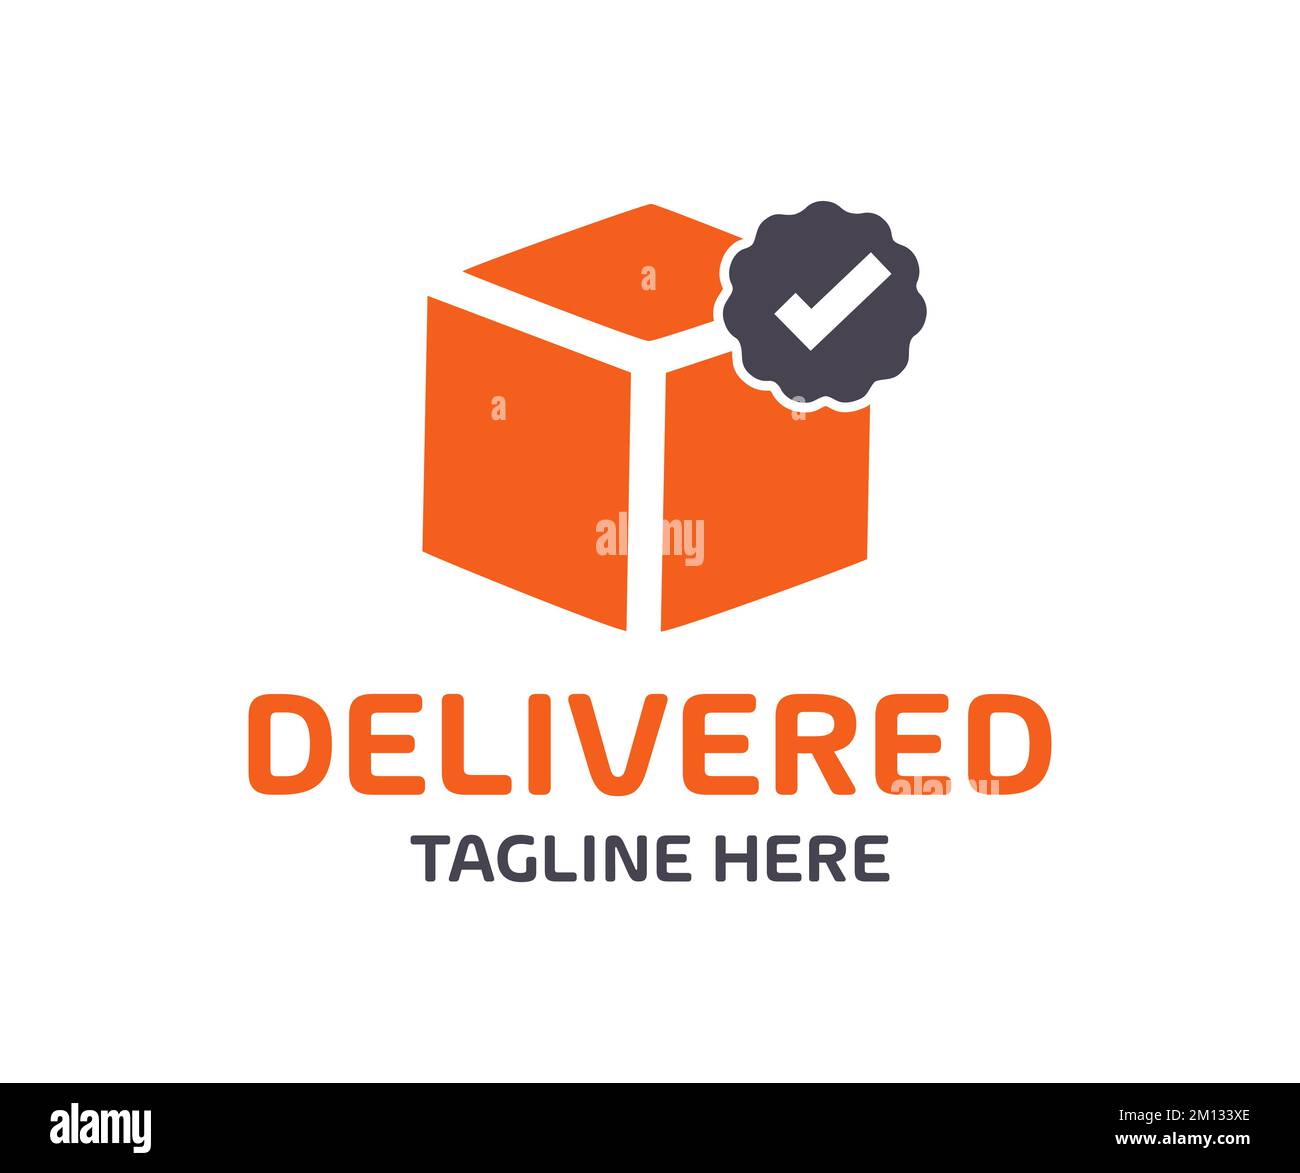 Delivered box, Shipping icon  logo design. Containing delivery and logistic symbol. Delivered label. Cardboard parcel box delivered. Online purchase. Stock Vector